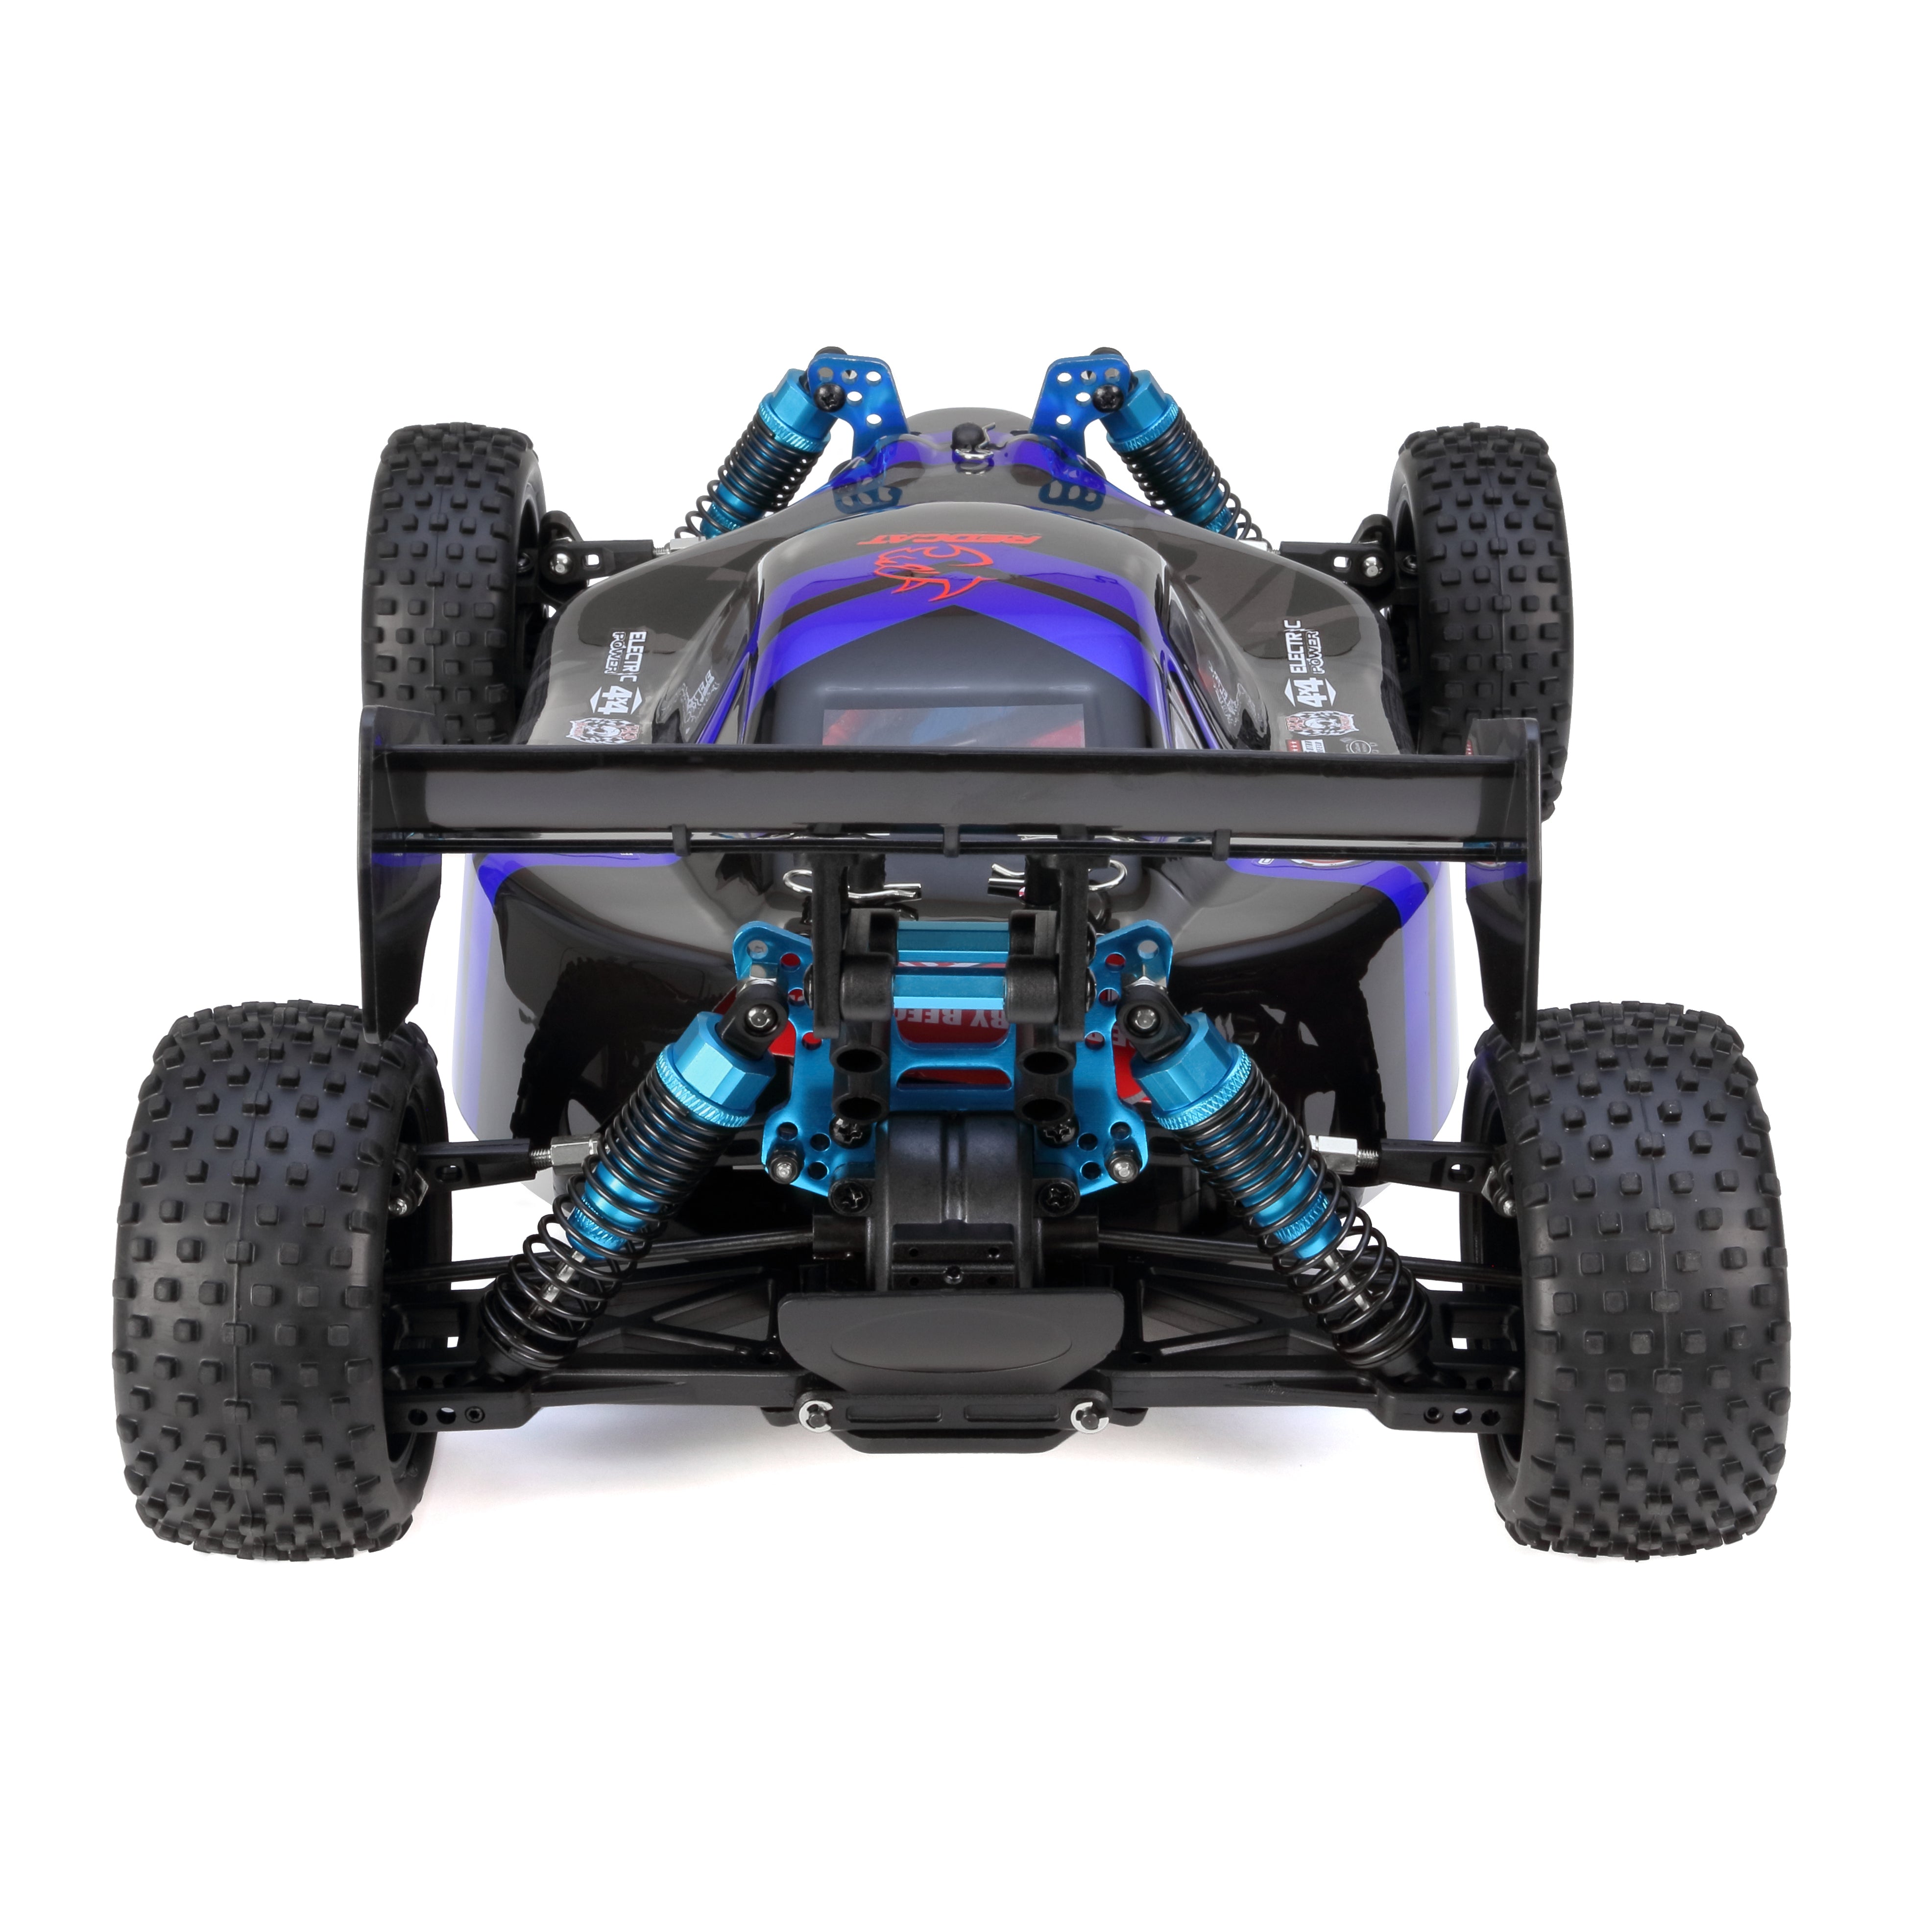 Tornado EPX PRO Buggy 1/10 Scale Brushless V2 Electric